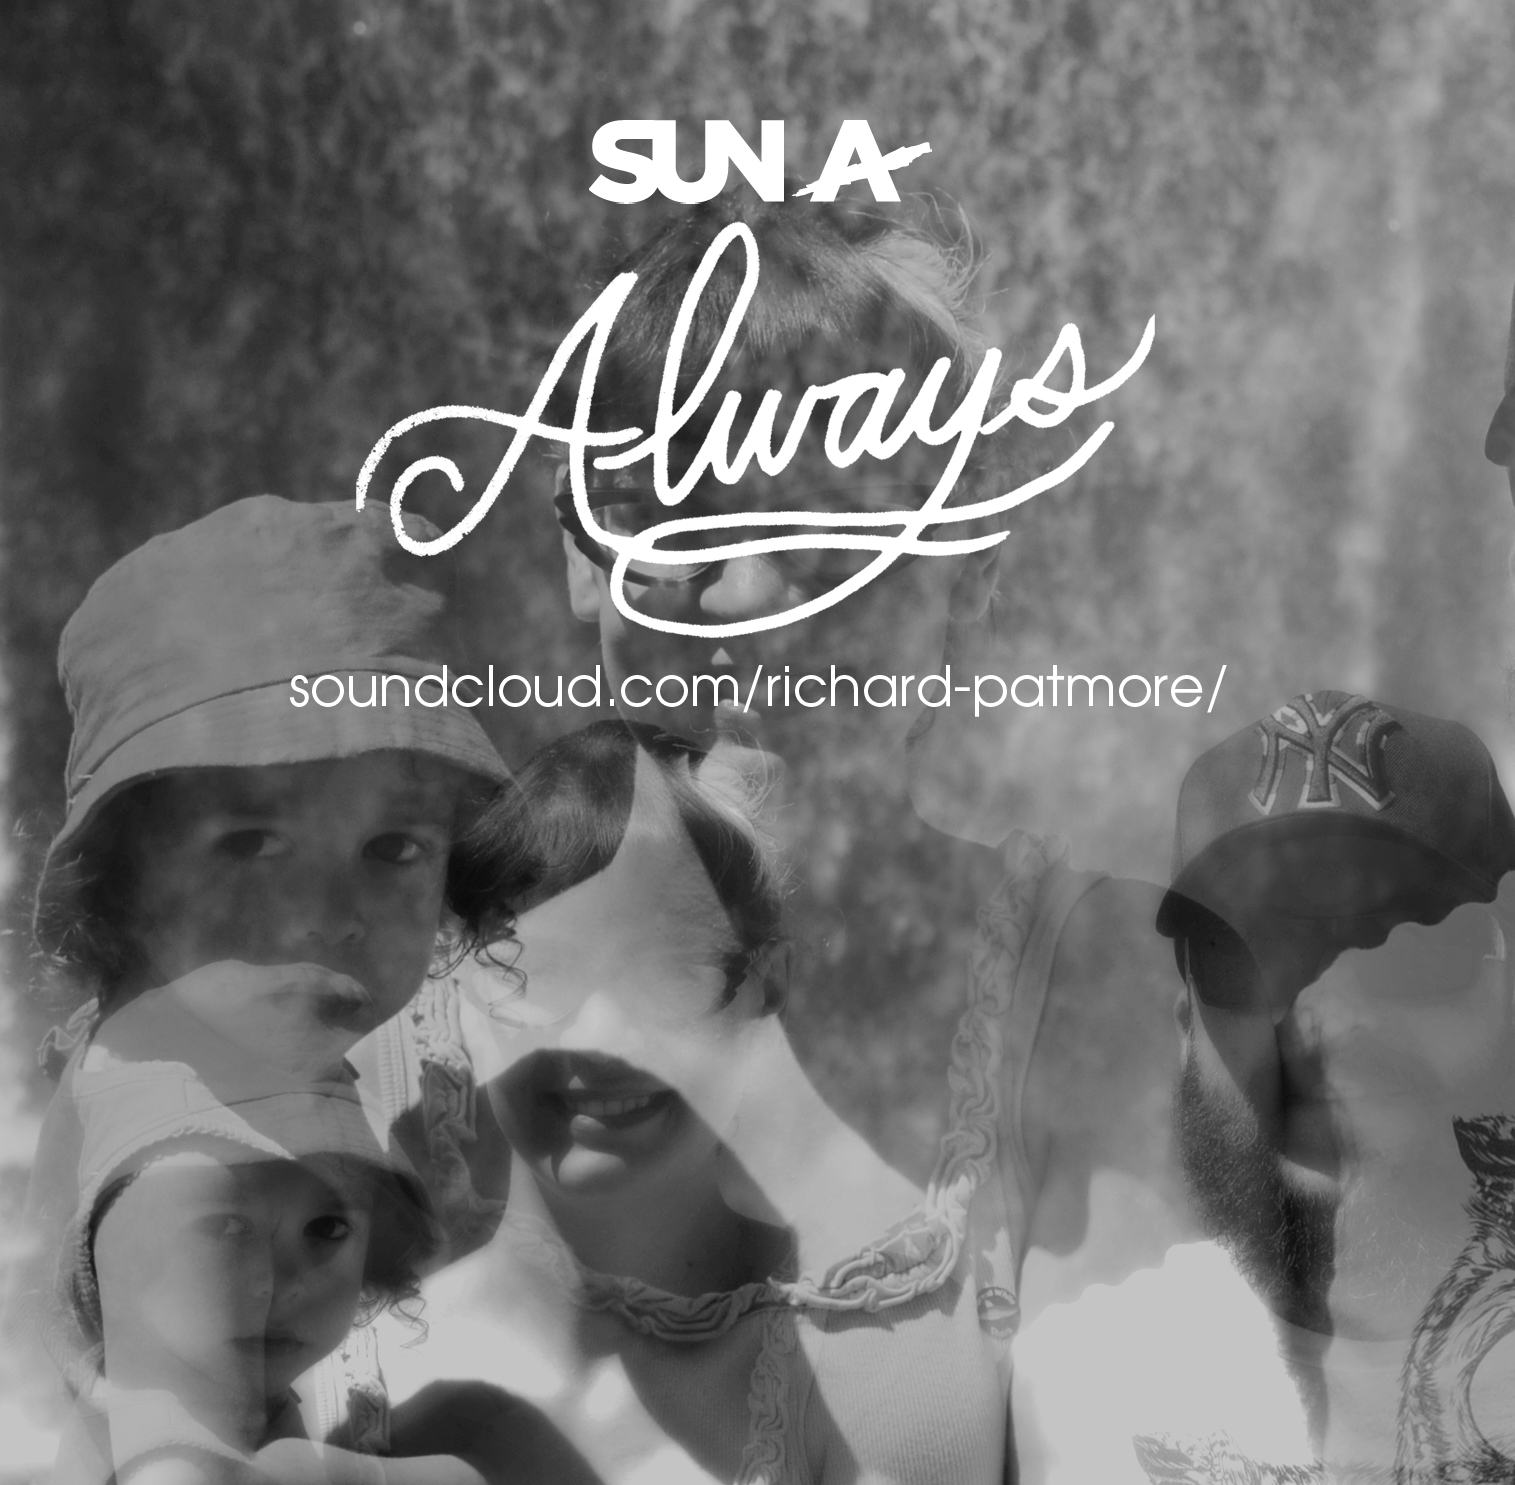 New song by SUN A 'Always'